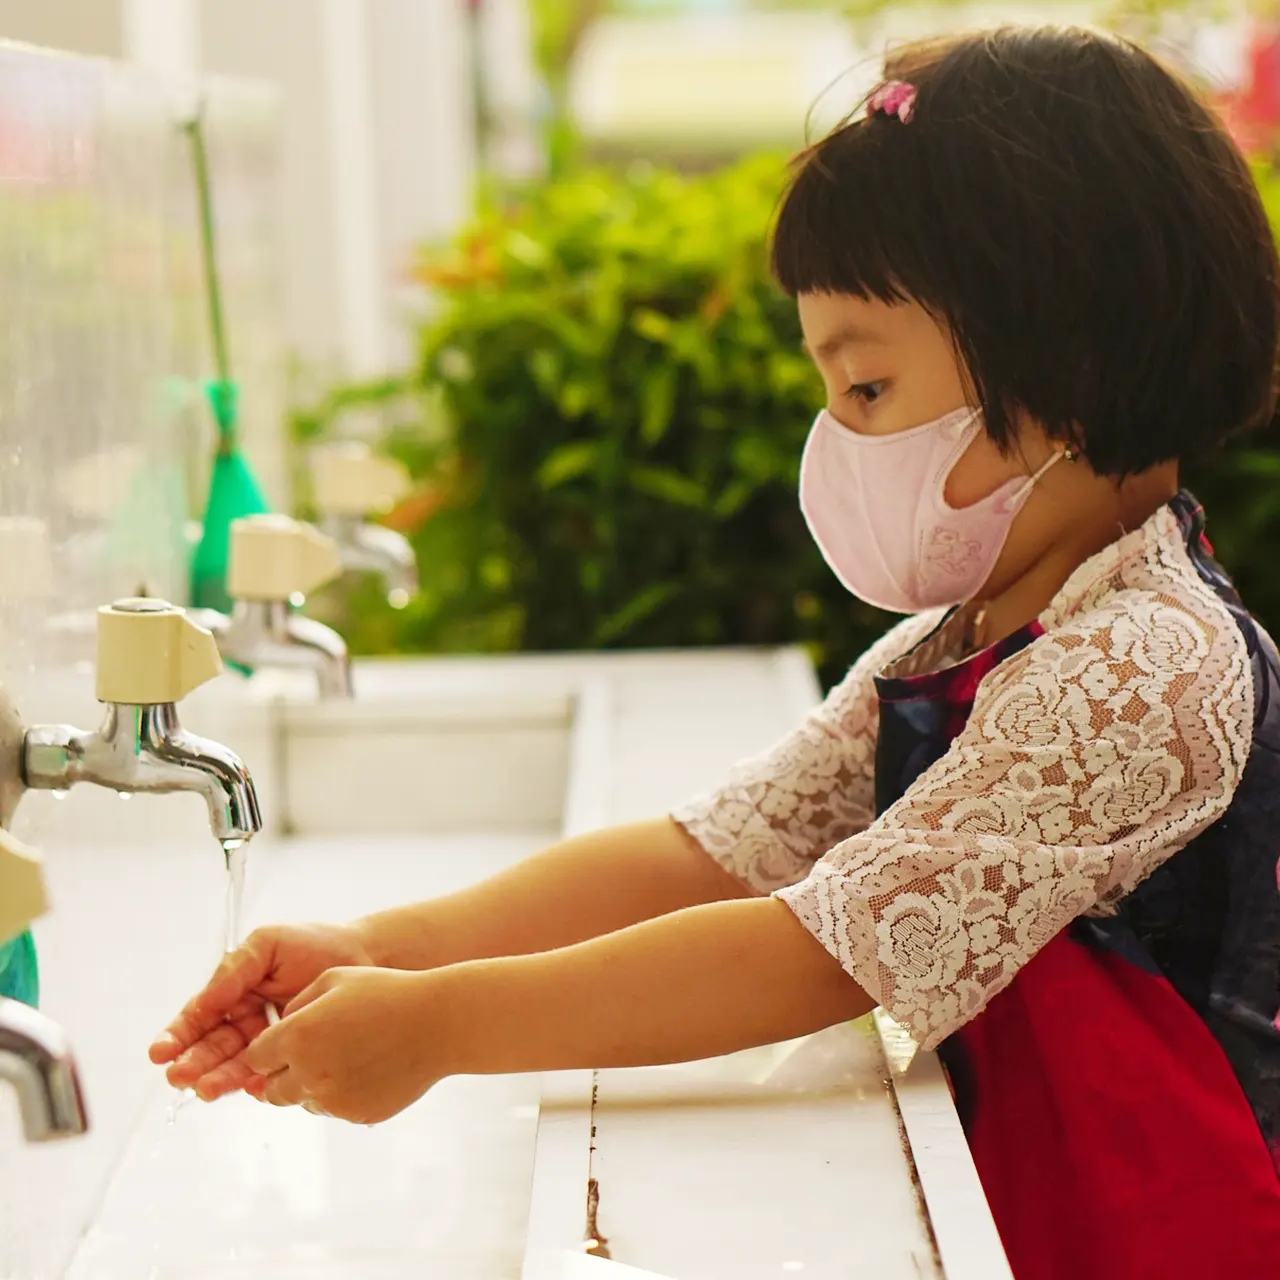 Little child washes hands. Image by Nghi Nguyen from Pixabay